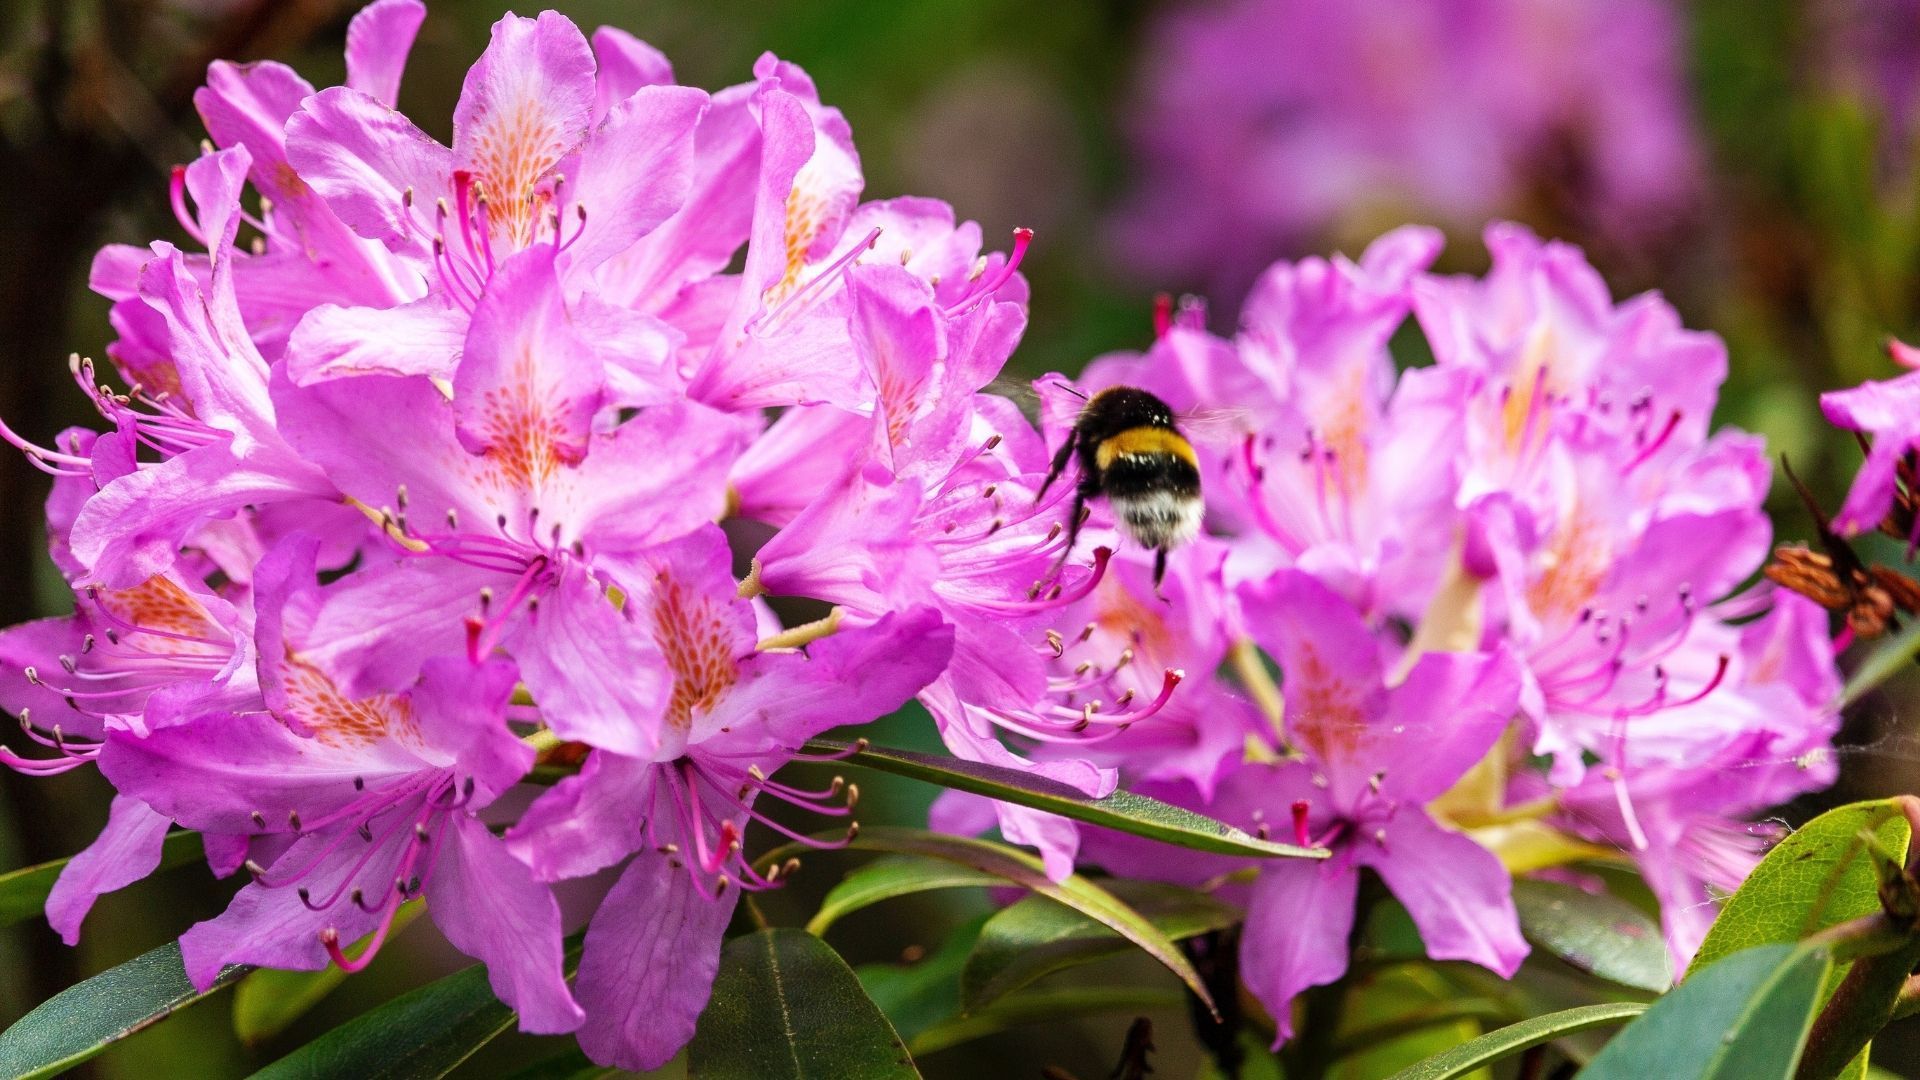 Most beautiful flowers: Rhododendron